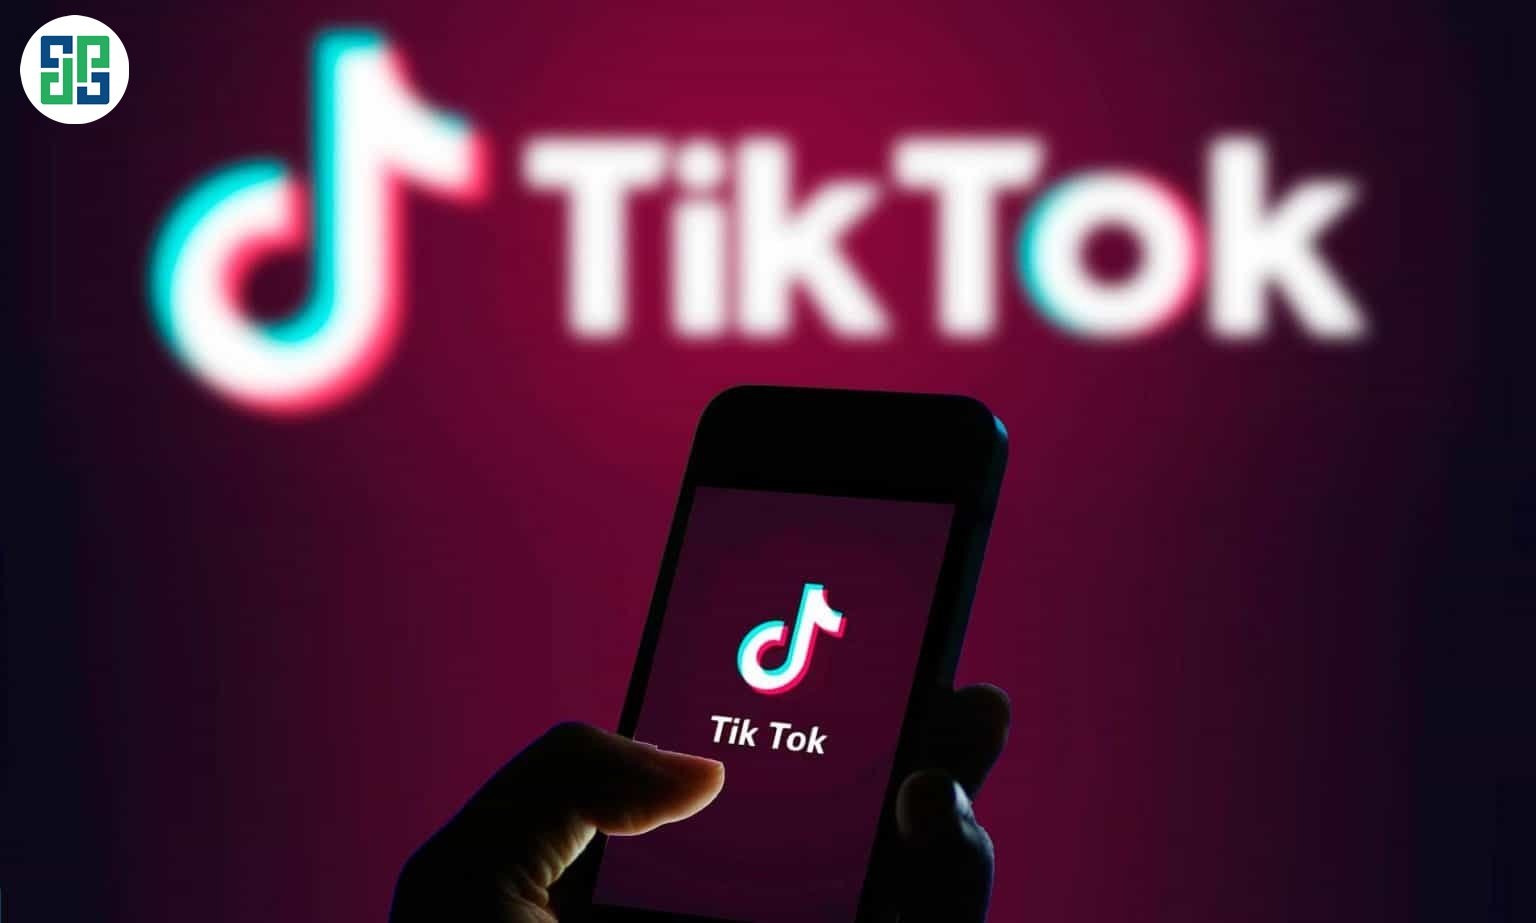 Taking care of Tik Tok channel, going up from 0 